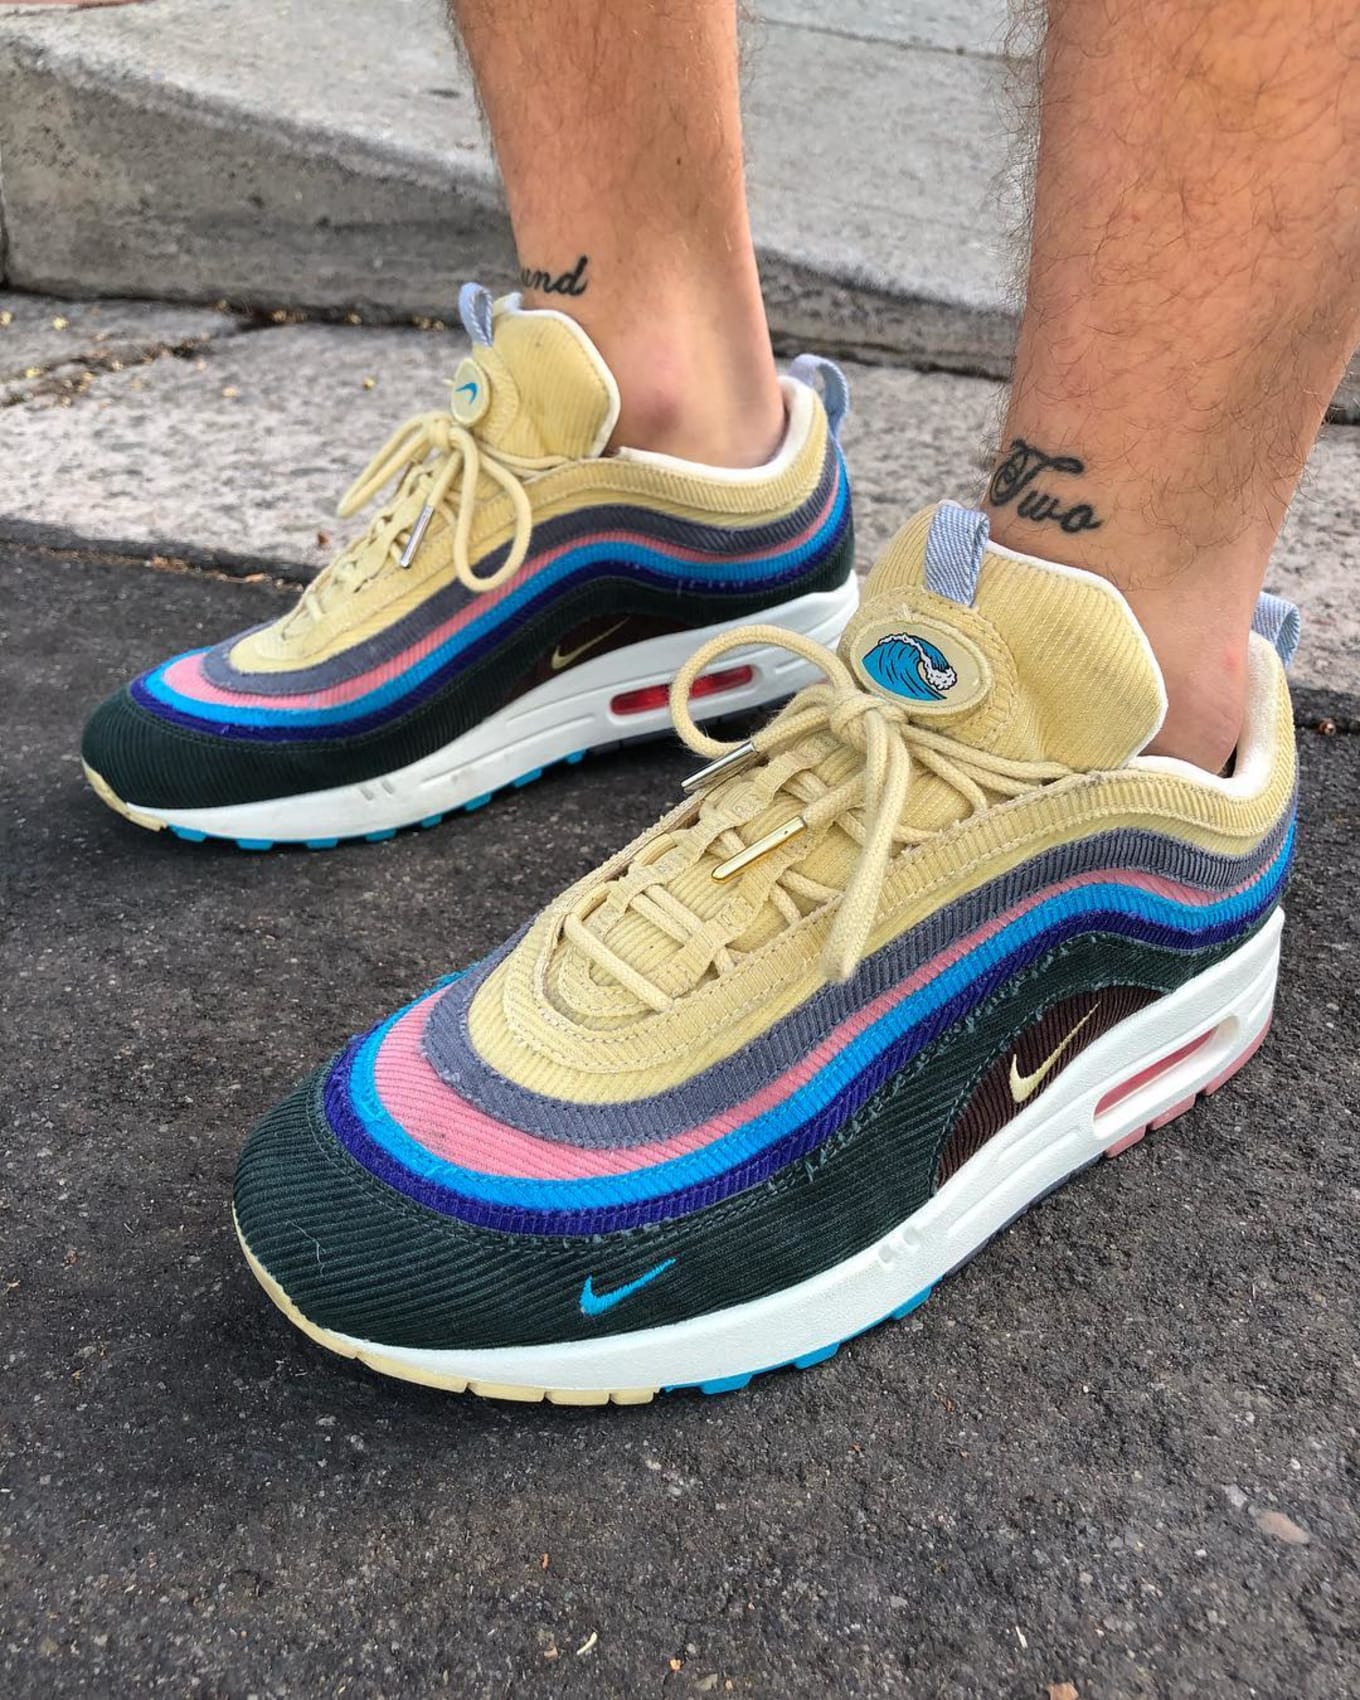 Normal Darse prisa Alicia Sean Wotherspoon Nike Air Max 97 x Air Max 1 Hybrid Release Date | Sole  Collector